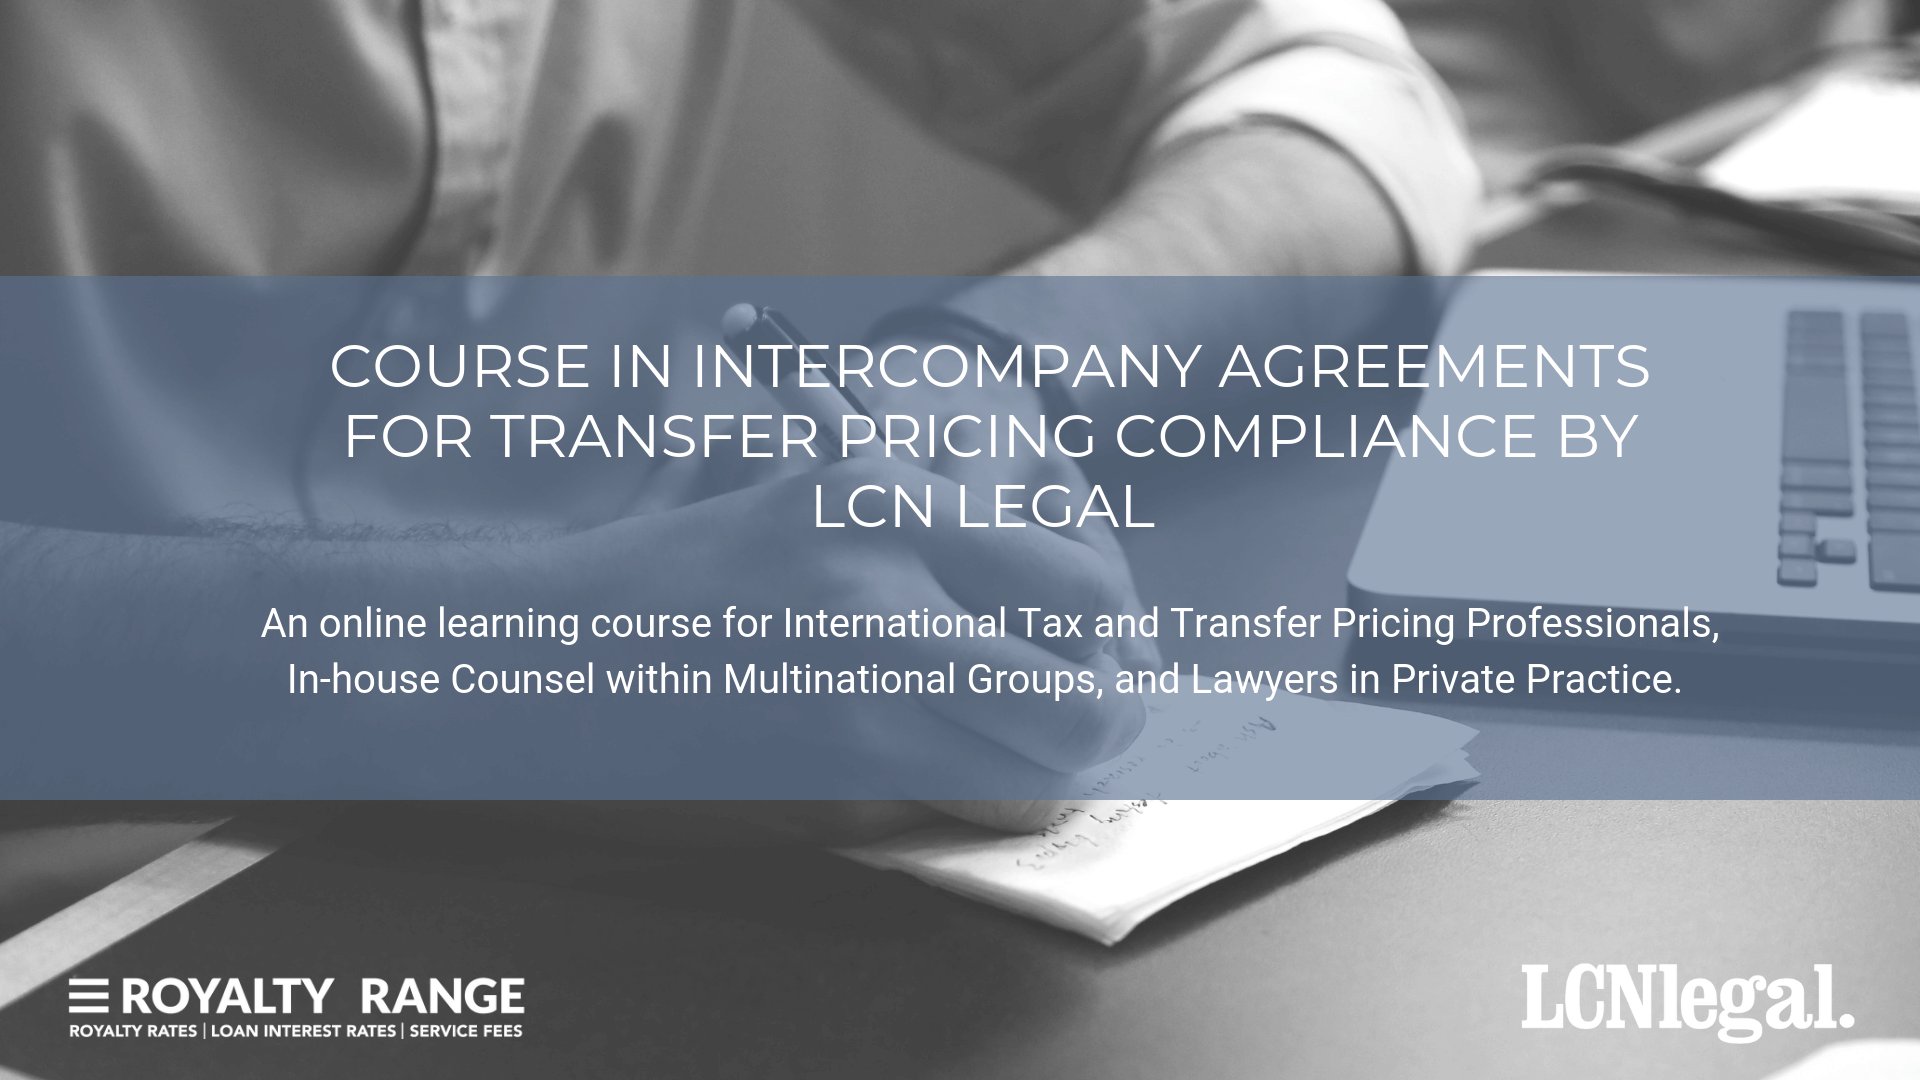 COURSE IN INTERCOMPANY AGREEMENTS FOR TRANSFER PRICING COMPLIANCE BY LCN LEGAL